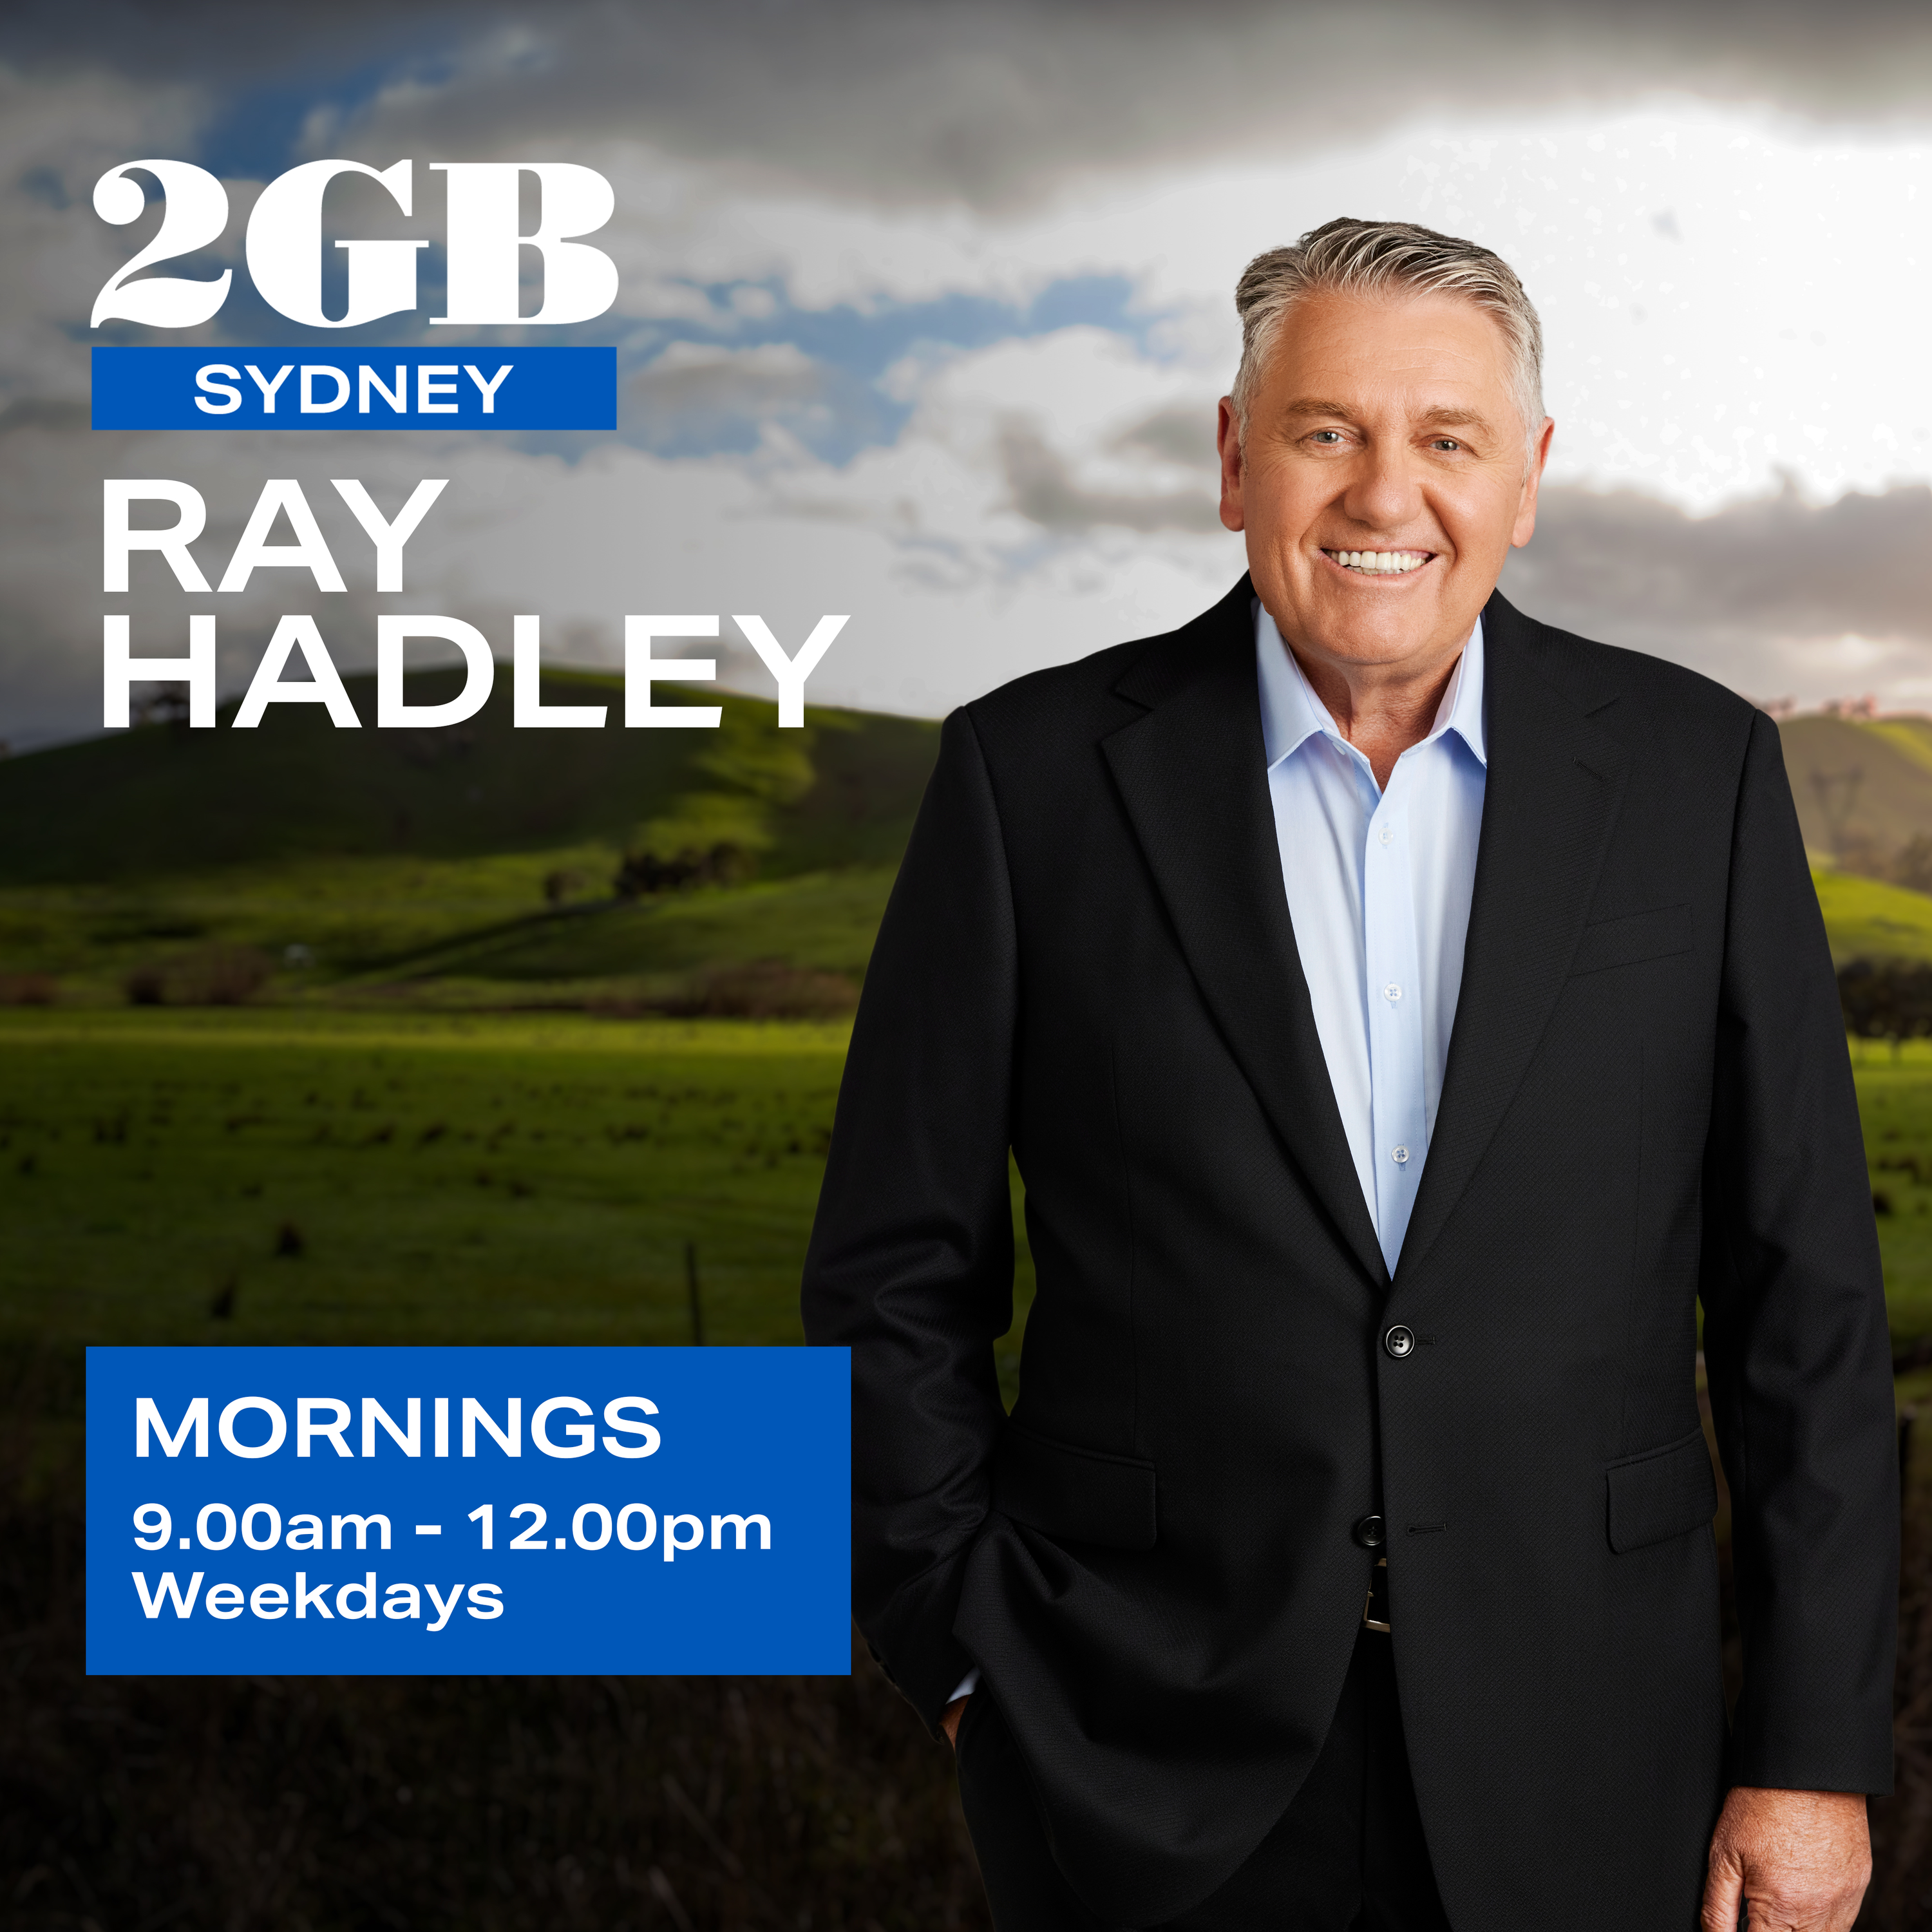 Ray Hadley confronts Labor leader over "white flight" retraction